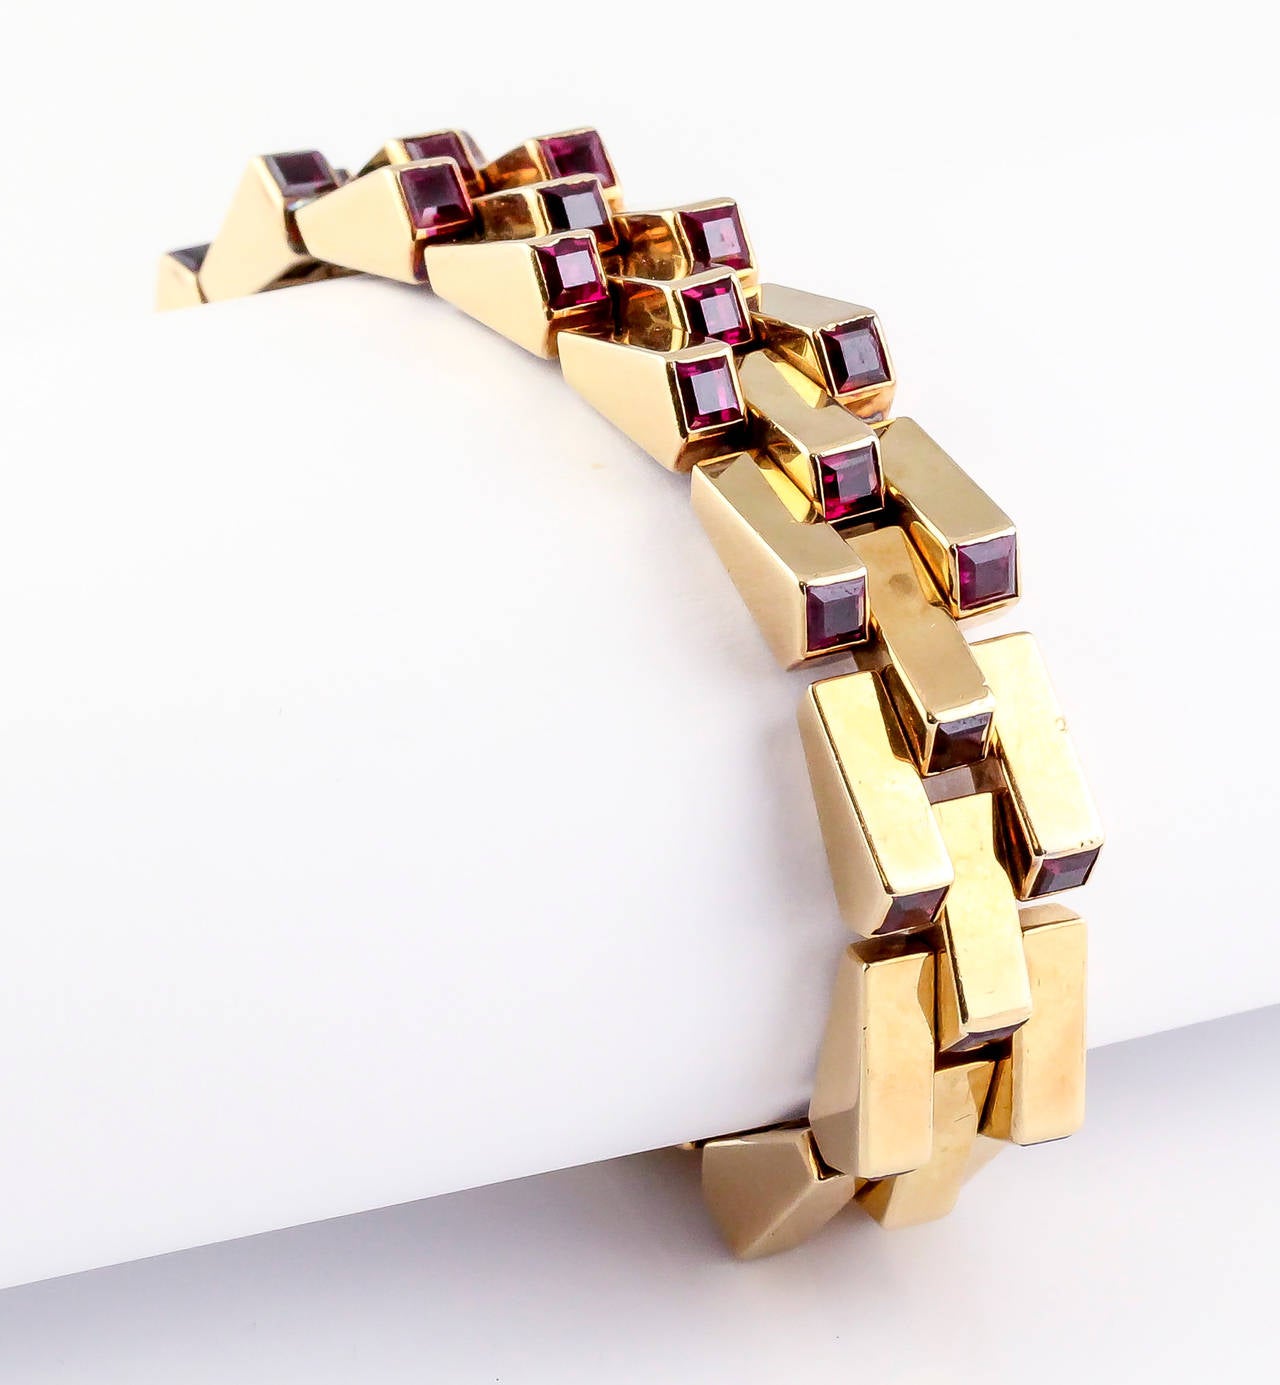 Very rare and unusual ruby and 18K yellow gold escalator bracelet by Boucheron, circa 1940s. It features approx. 8.0-10.0cts of very high quality calibre cut  rubies of a very rich pigeon blood red color.
Hallmarks: Boucheron Paris, reference